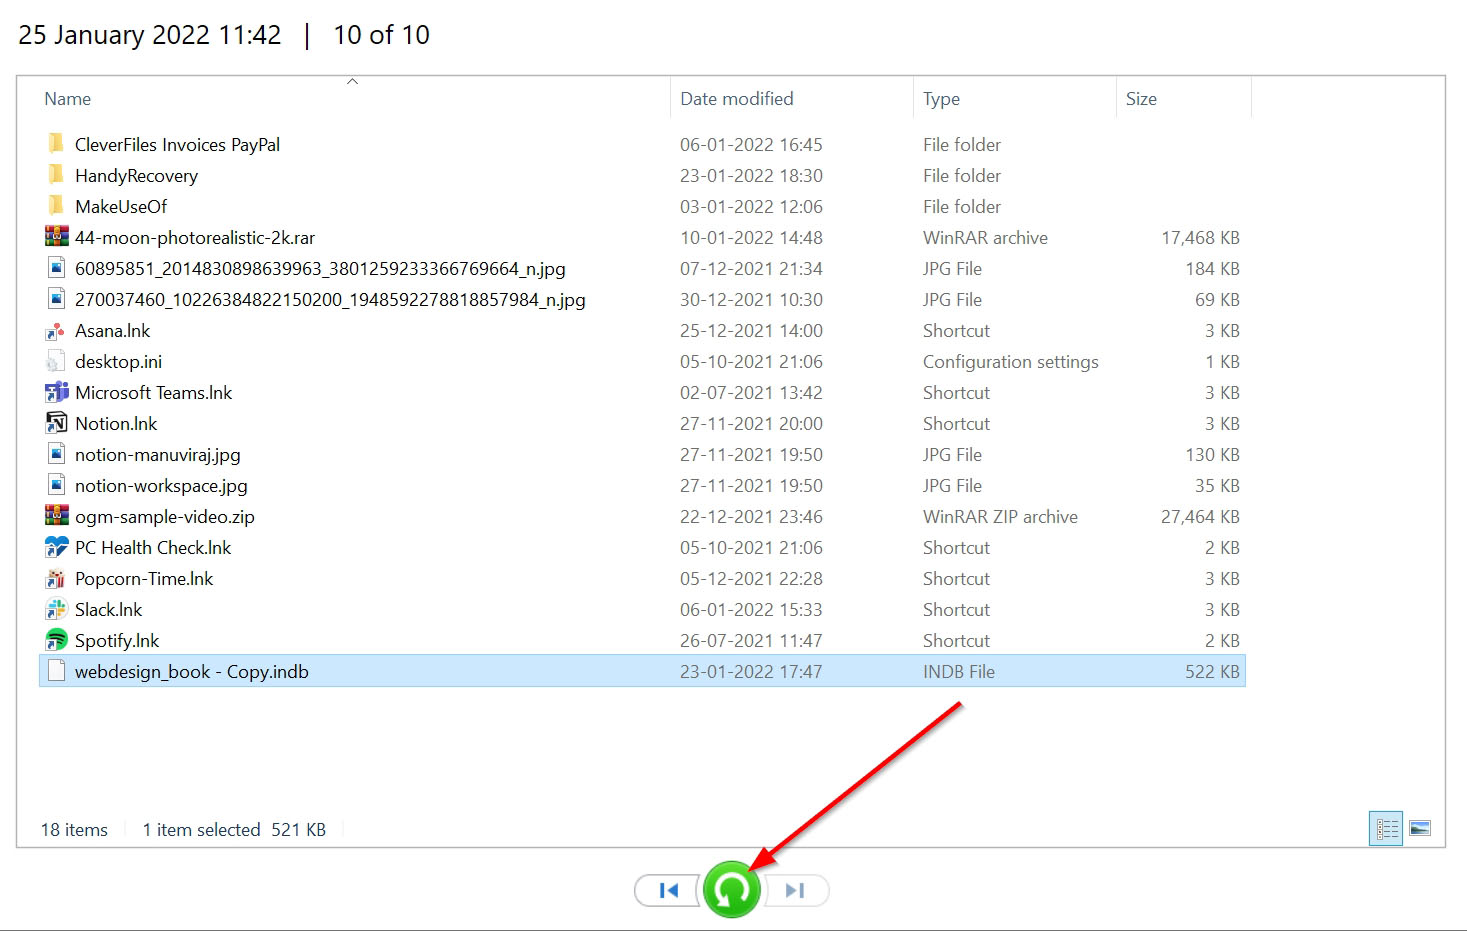 An INDB file in Windows File History.